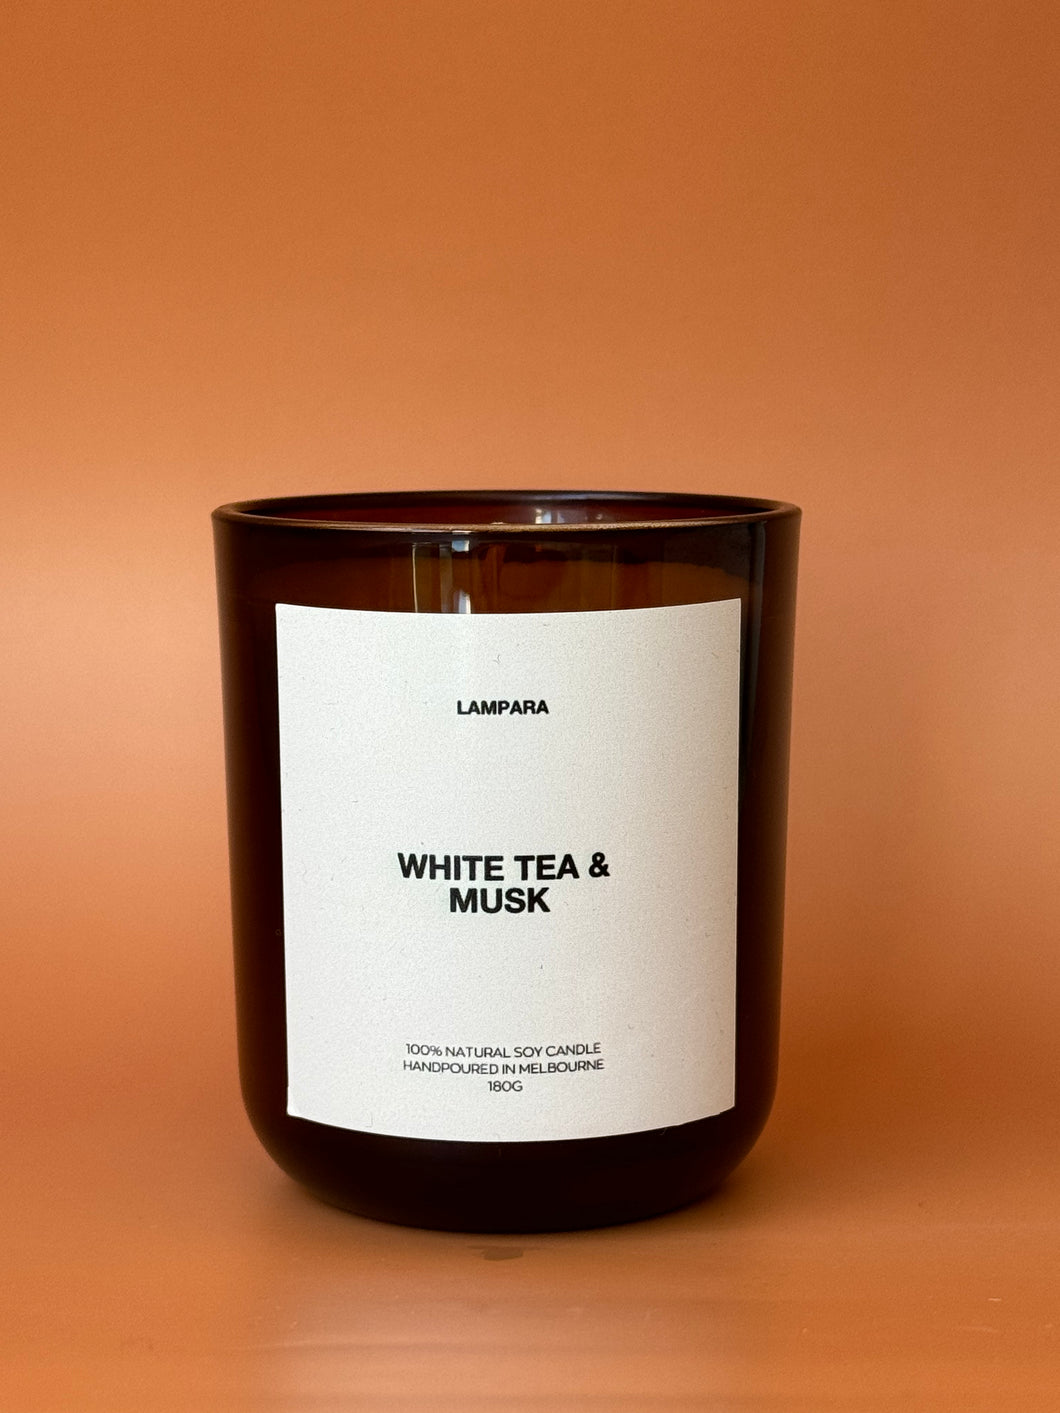 White Tea & Musk Soy Candles